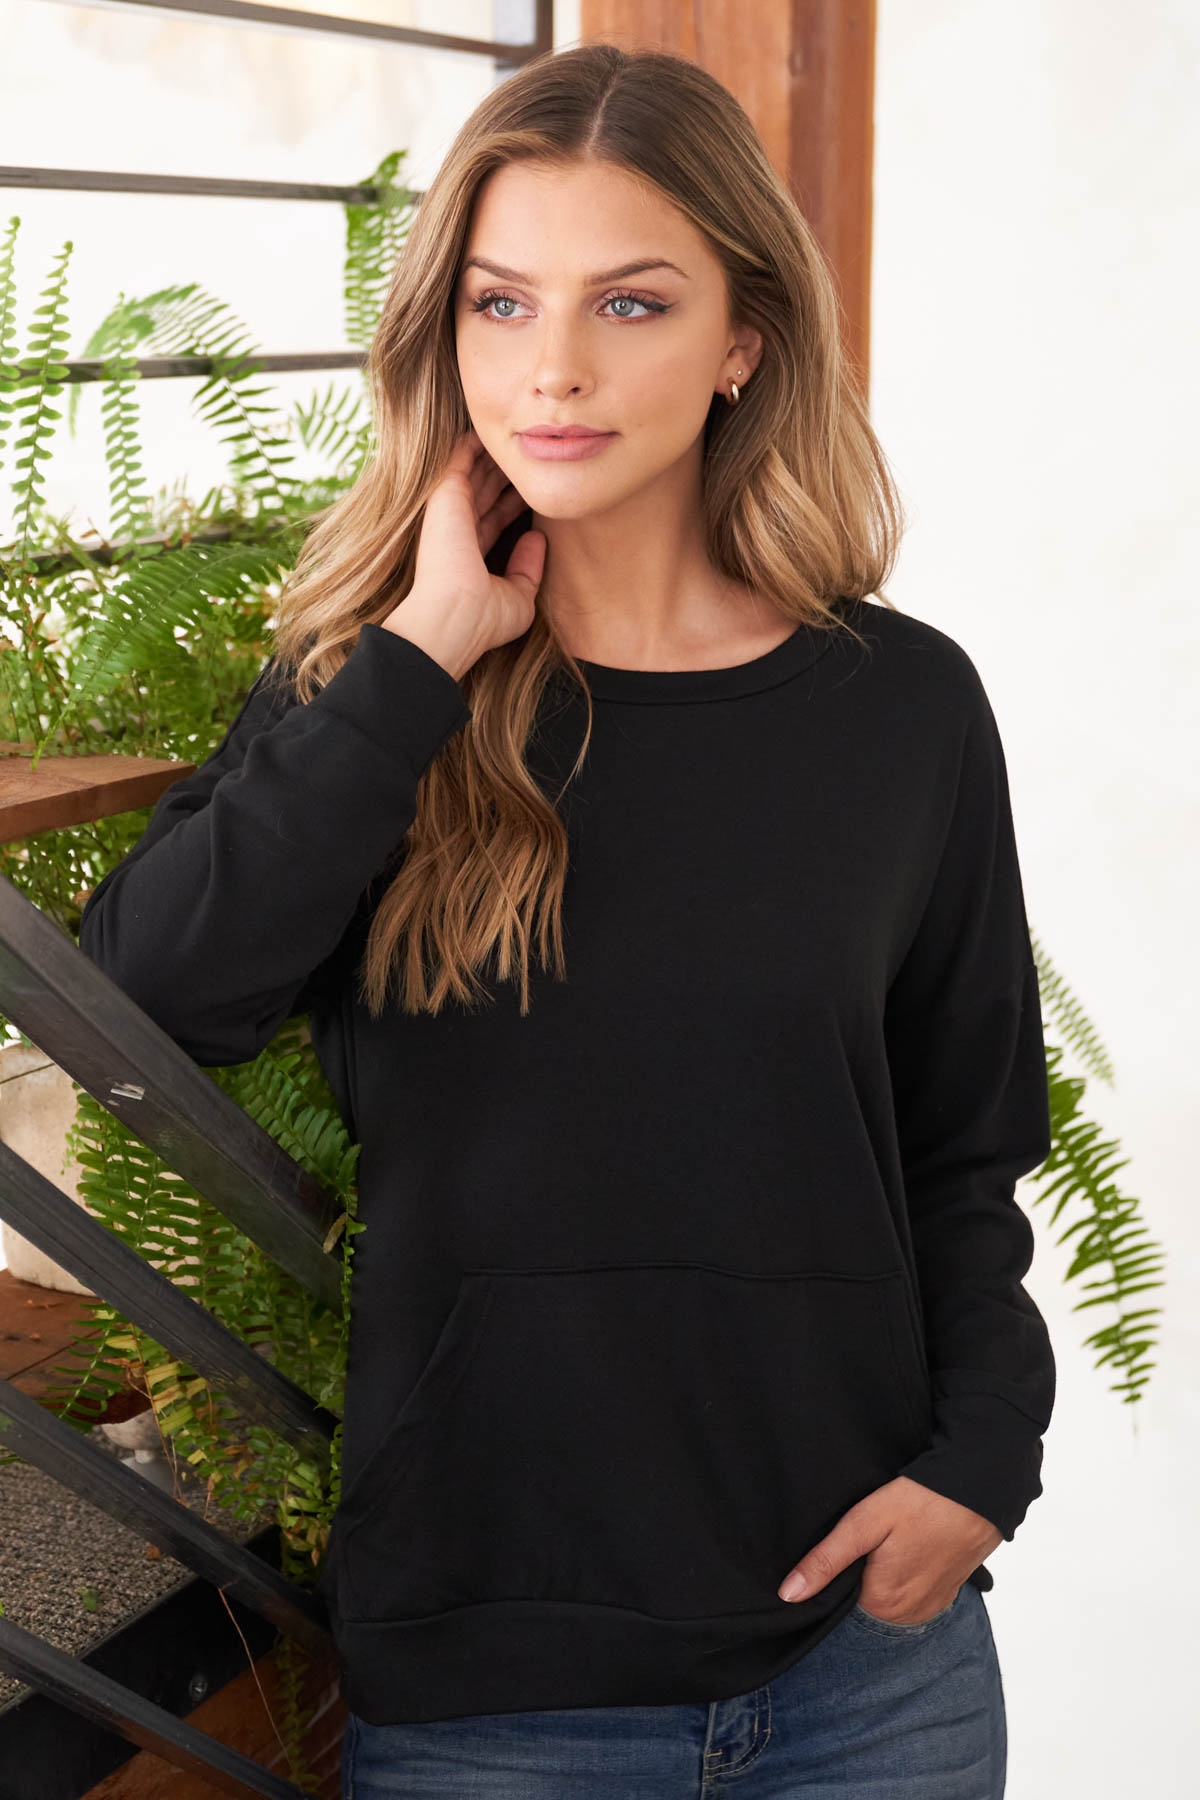 S9-11-3-PPT2063-FT-BKJT BLACK JET LONG SLEEVE FRENCH TERRY TOP WITH KANGAROO POCKET TOP 1-2-2-2